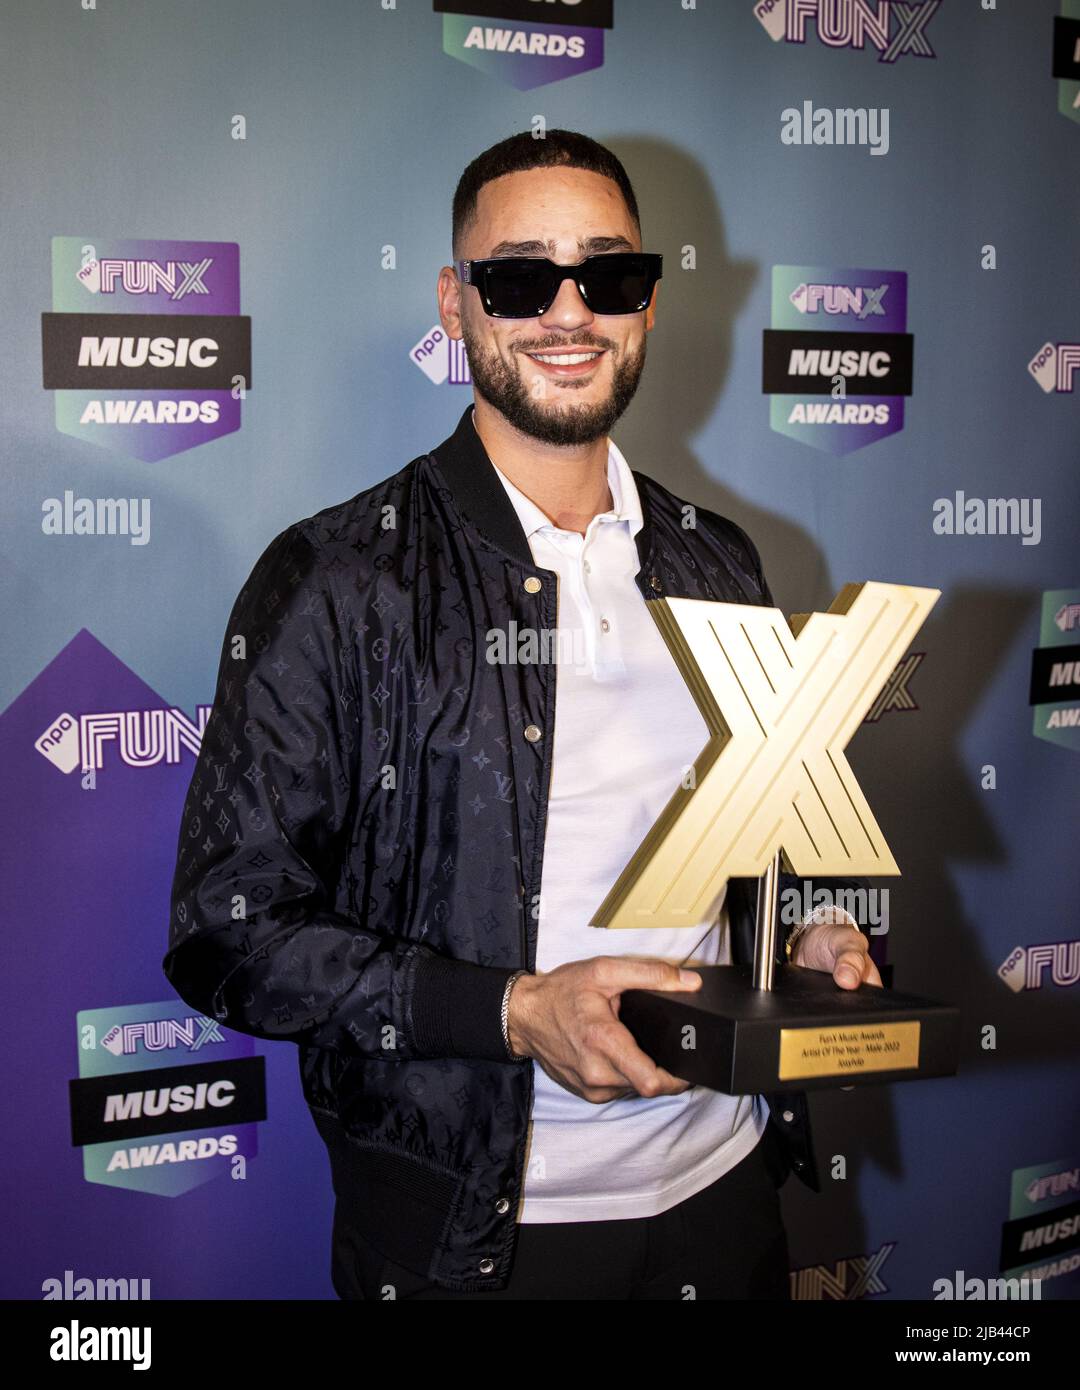 2022-06-02 22:55:39 AMSTERDAM - Josylvio wins the artist of the year male Award during the FunX Music Awards in AFAS Live in Amsterdam. During the award show, the most important music prizes of the young Netherlands were presented. ANP RAMON VAN FLYMEN netherlands out - belgium out Stock Photo